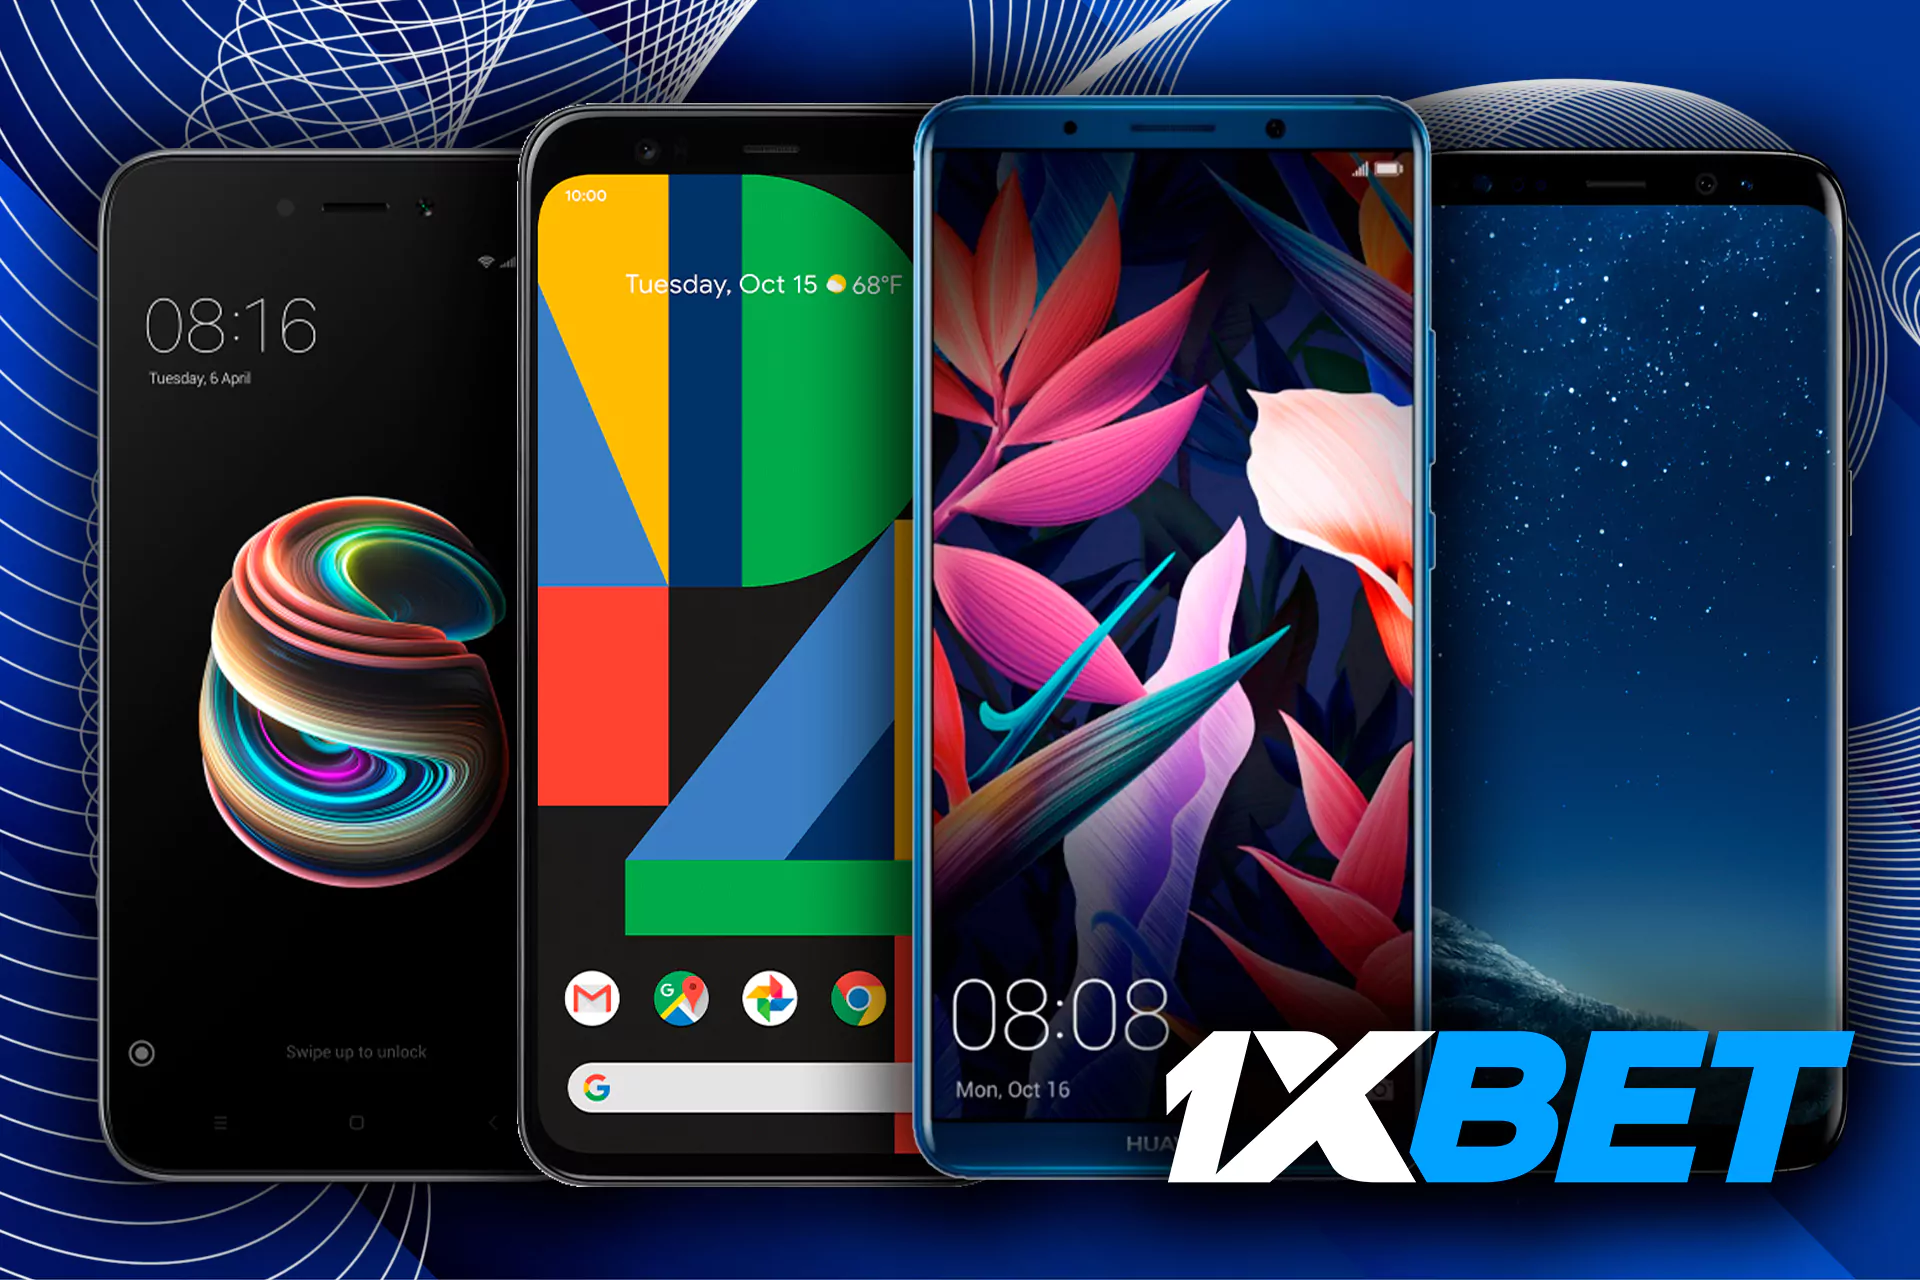 These Android devices can esily install and run the 1xbet app.